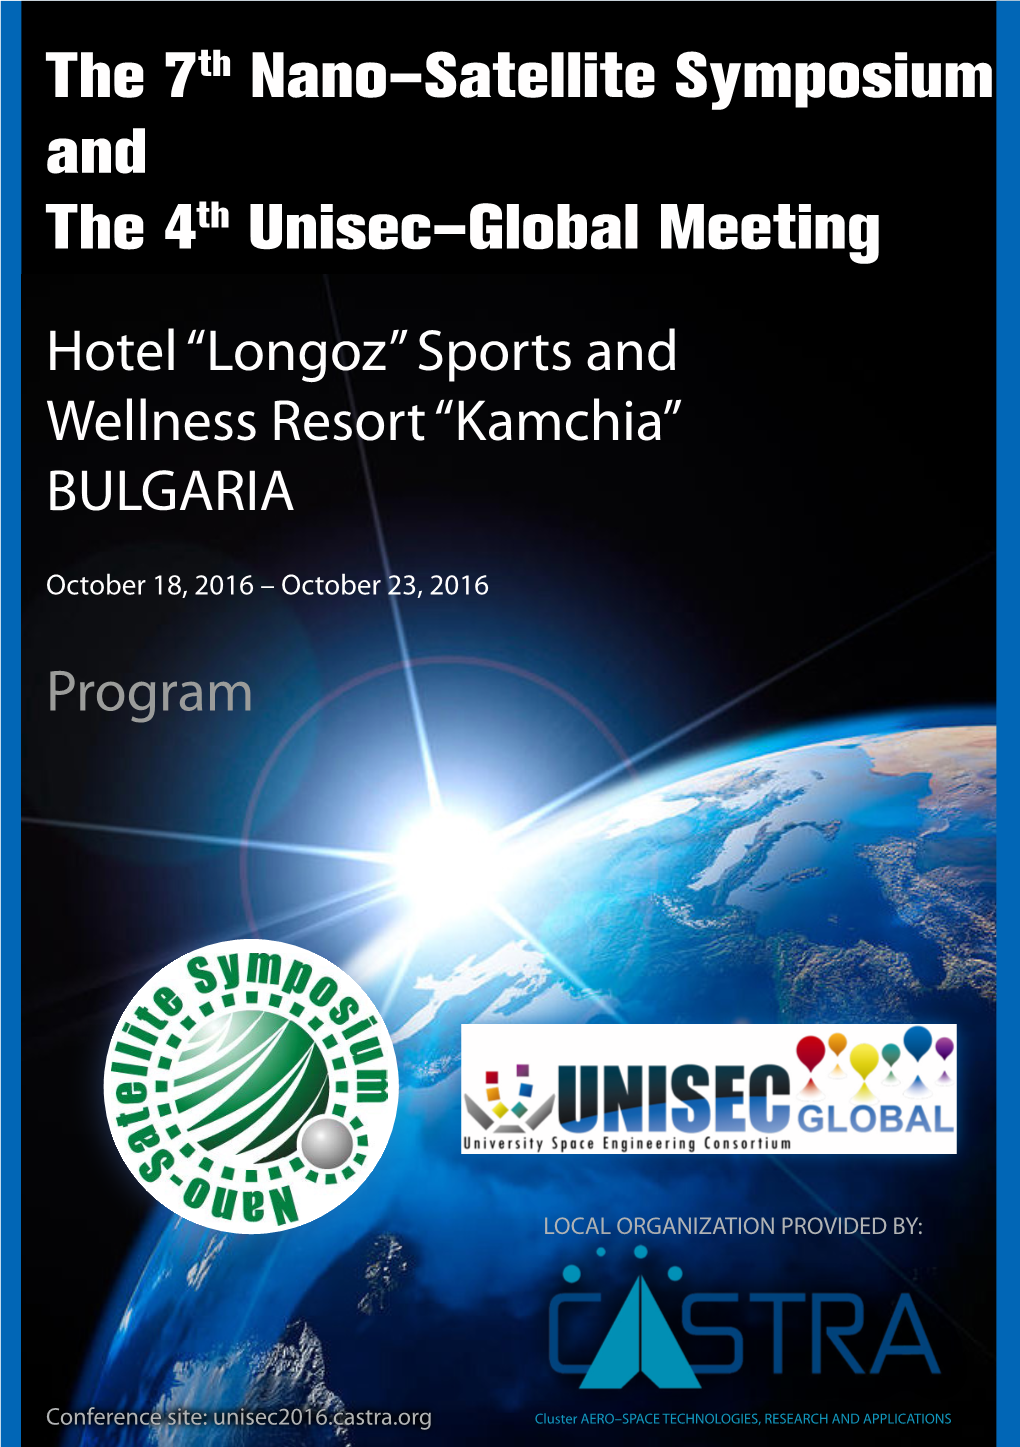 The 7Th Nano–Satellite Symposium and the 4Th Unisec–Global Meeting